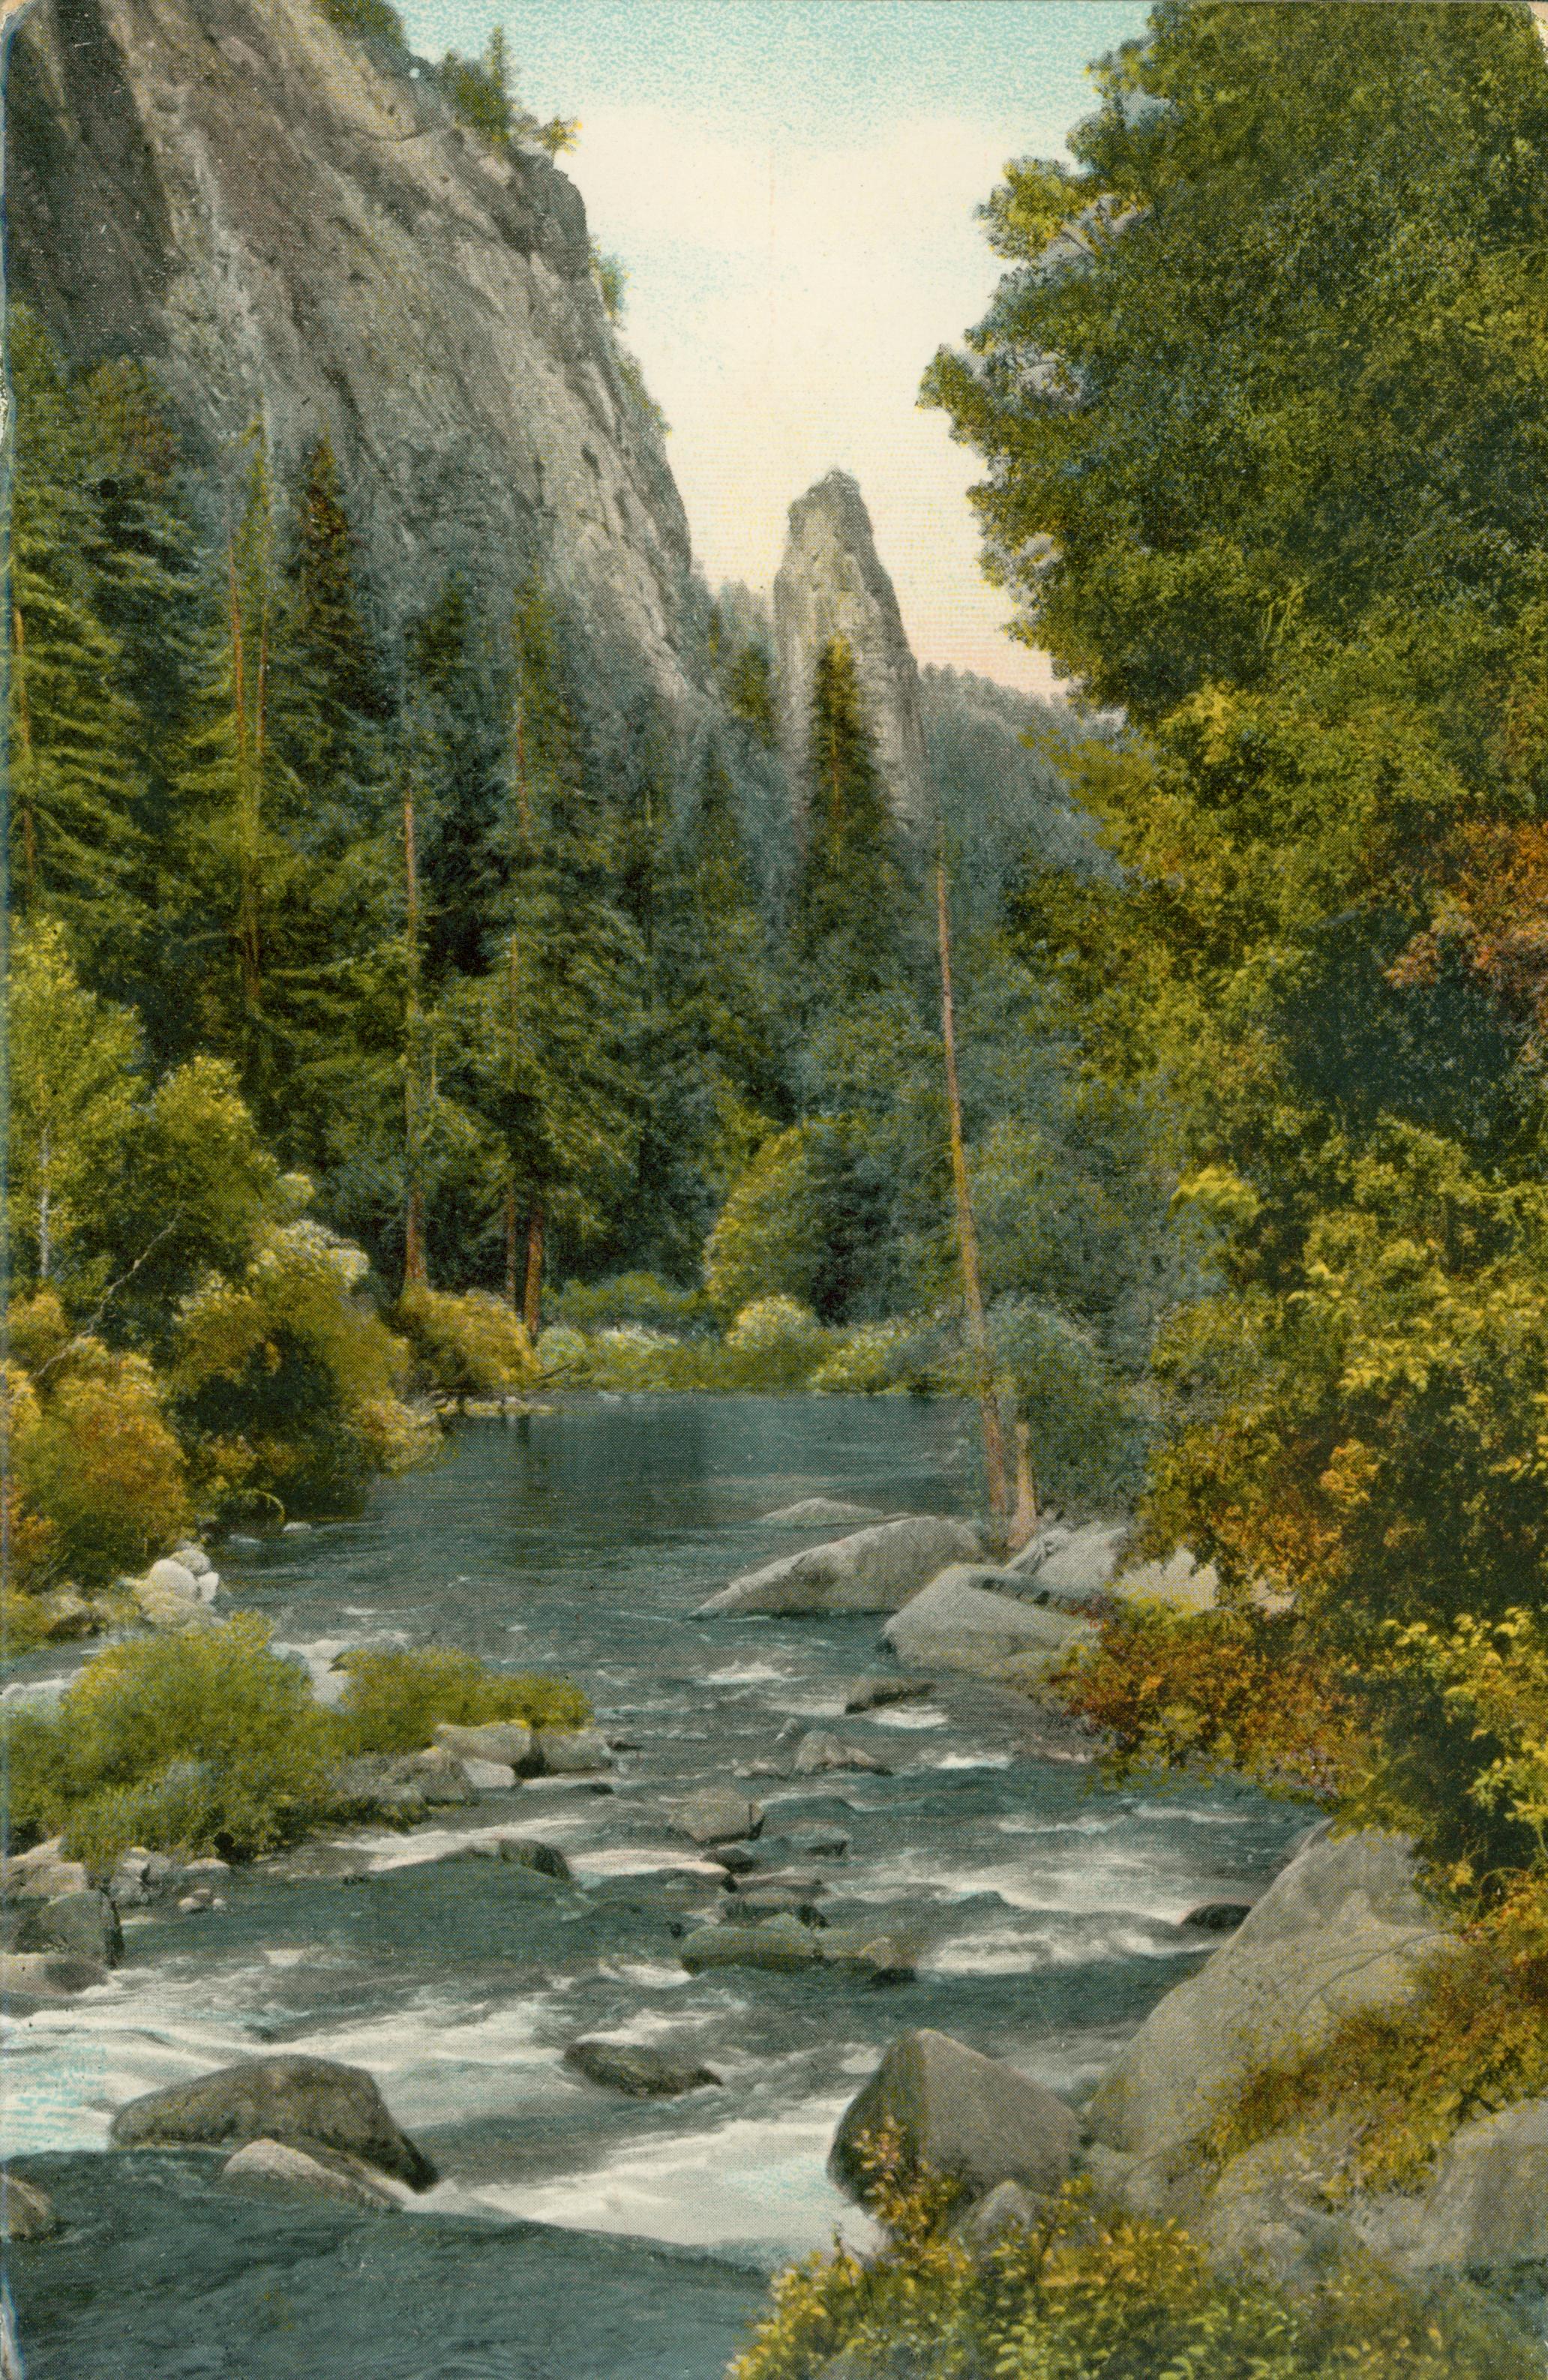 Shows the Merced River